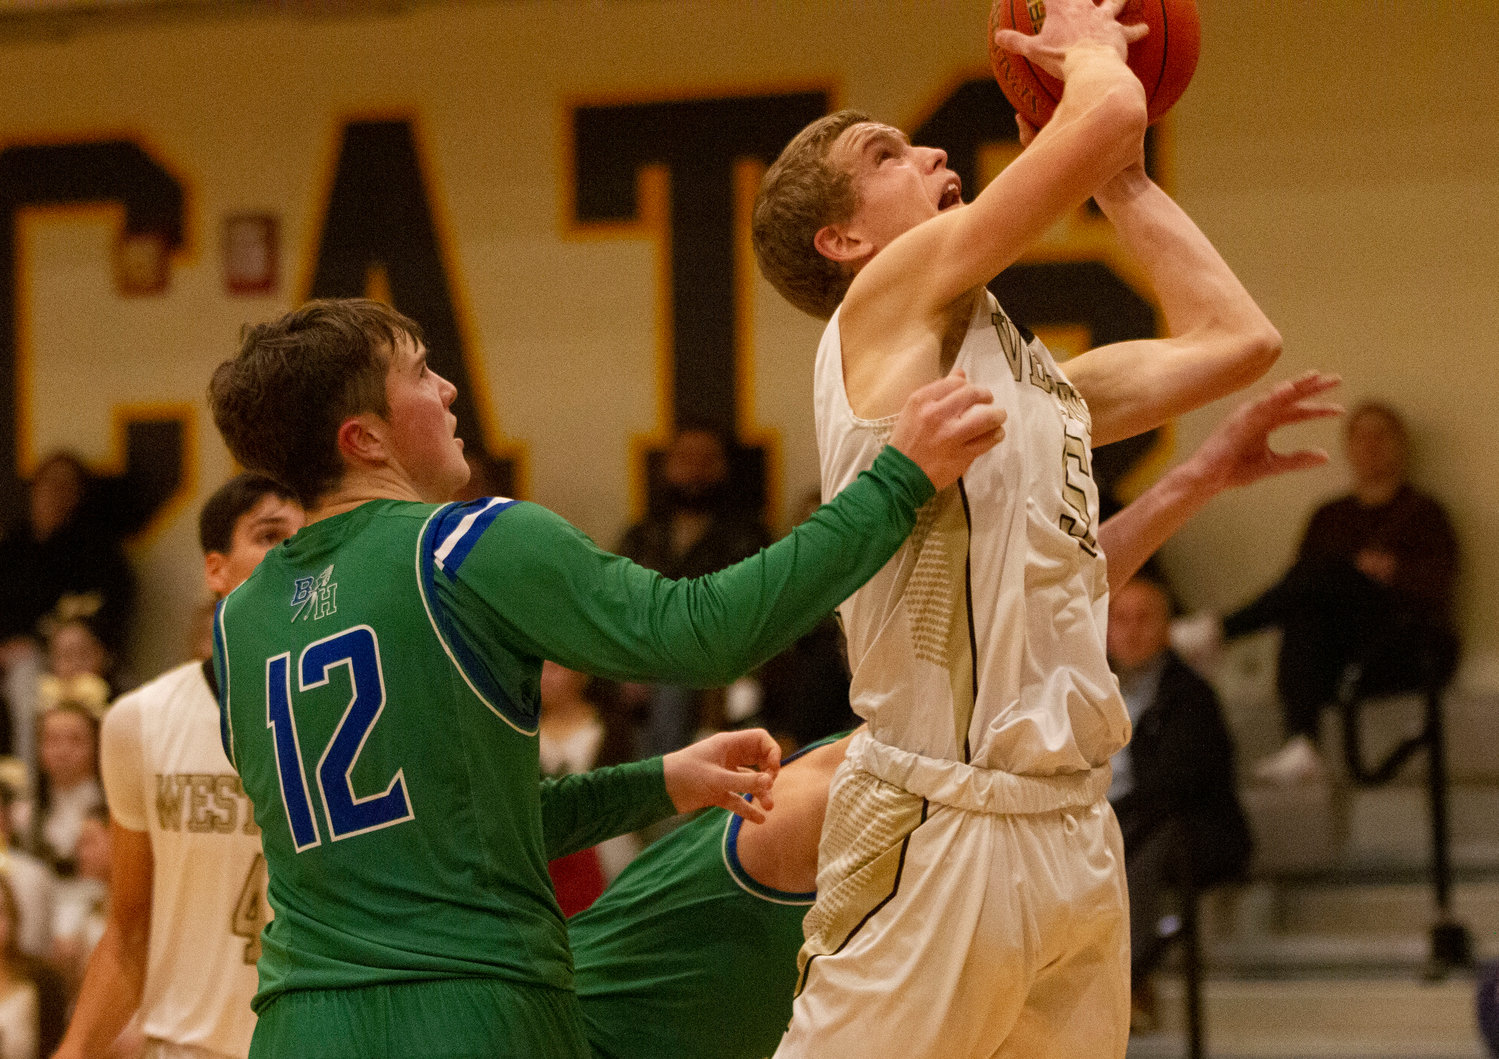 Coltrane McGonigle is fouled while putting back a rebound in the second half.